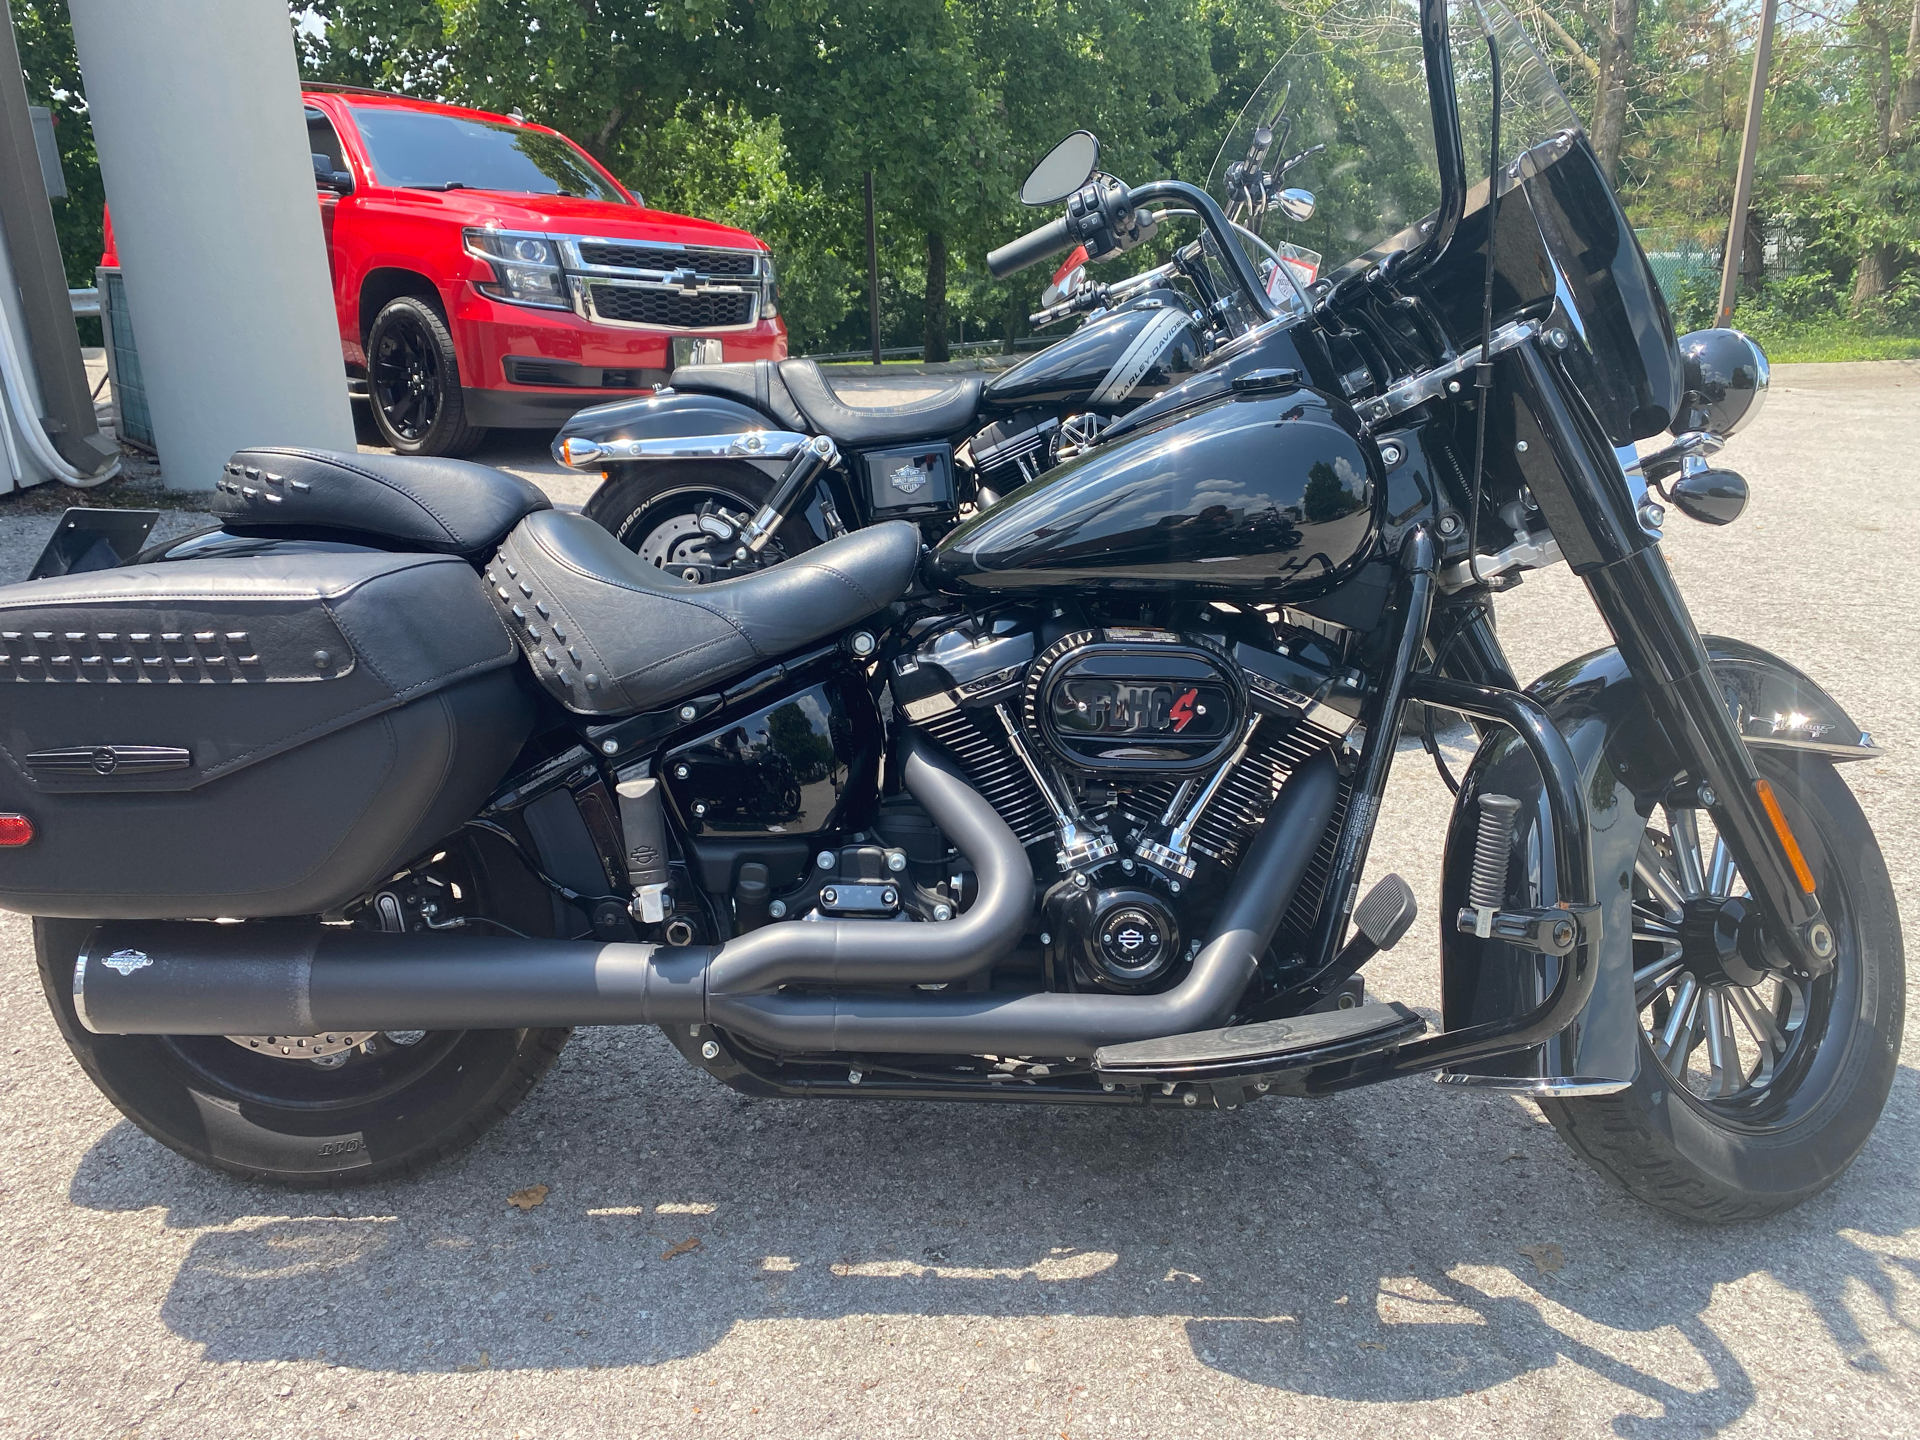 2019 Harley-Davidson Heritage Classic 114 in Franklin, Tennessee - Photo 2